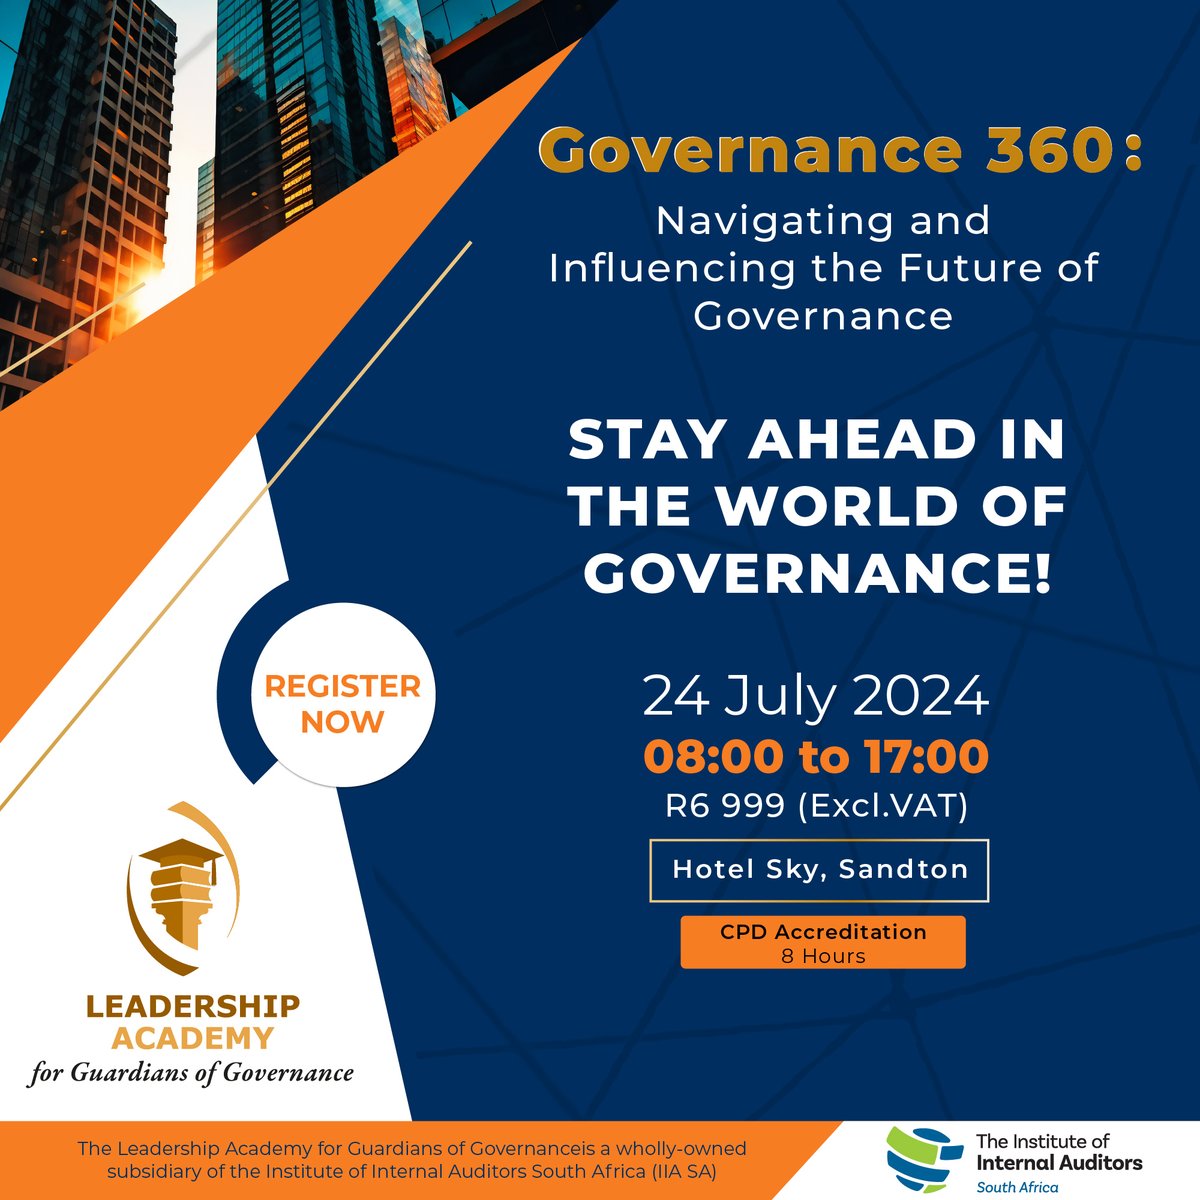 The Governance 360: Navigating and Influencing the Future of Governance Conference has been rescheduled to 24 July. Register now: evolve.eventoptions.co.za/register/gover….

#Governance360
#AI
#ESG
#cybersecuritytraining 
@IIASOUTHAFRICA